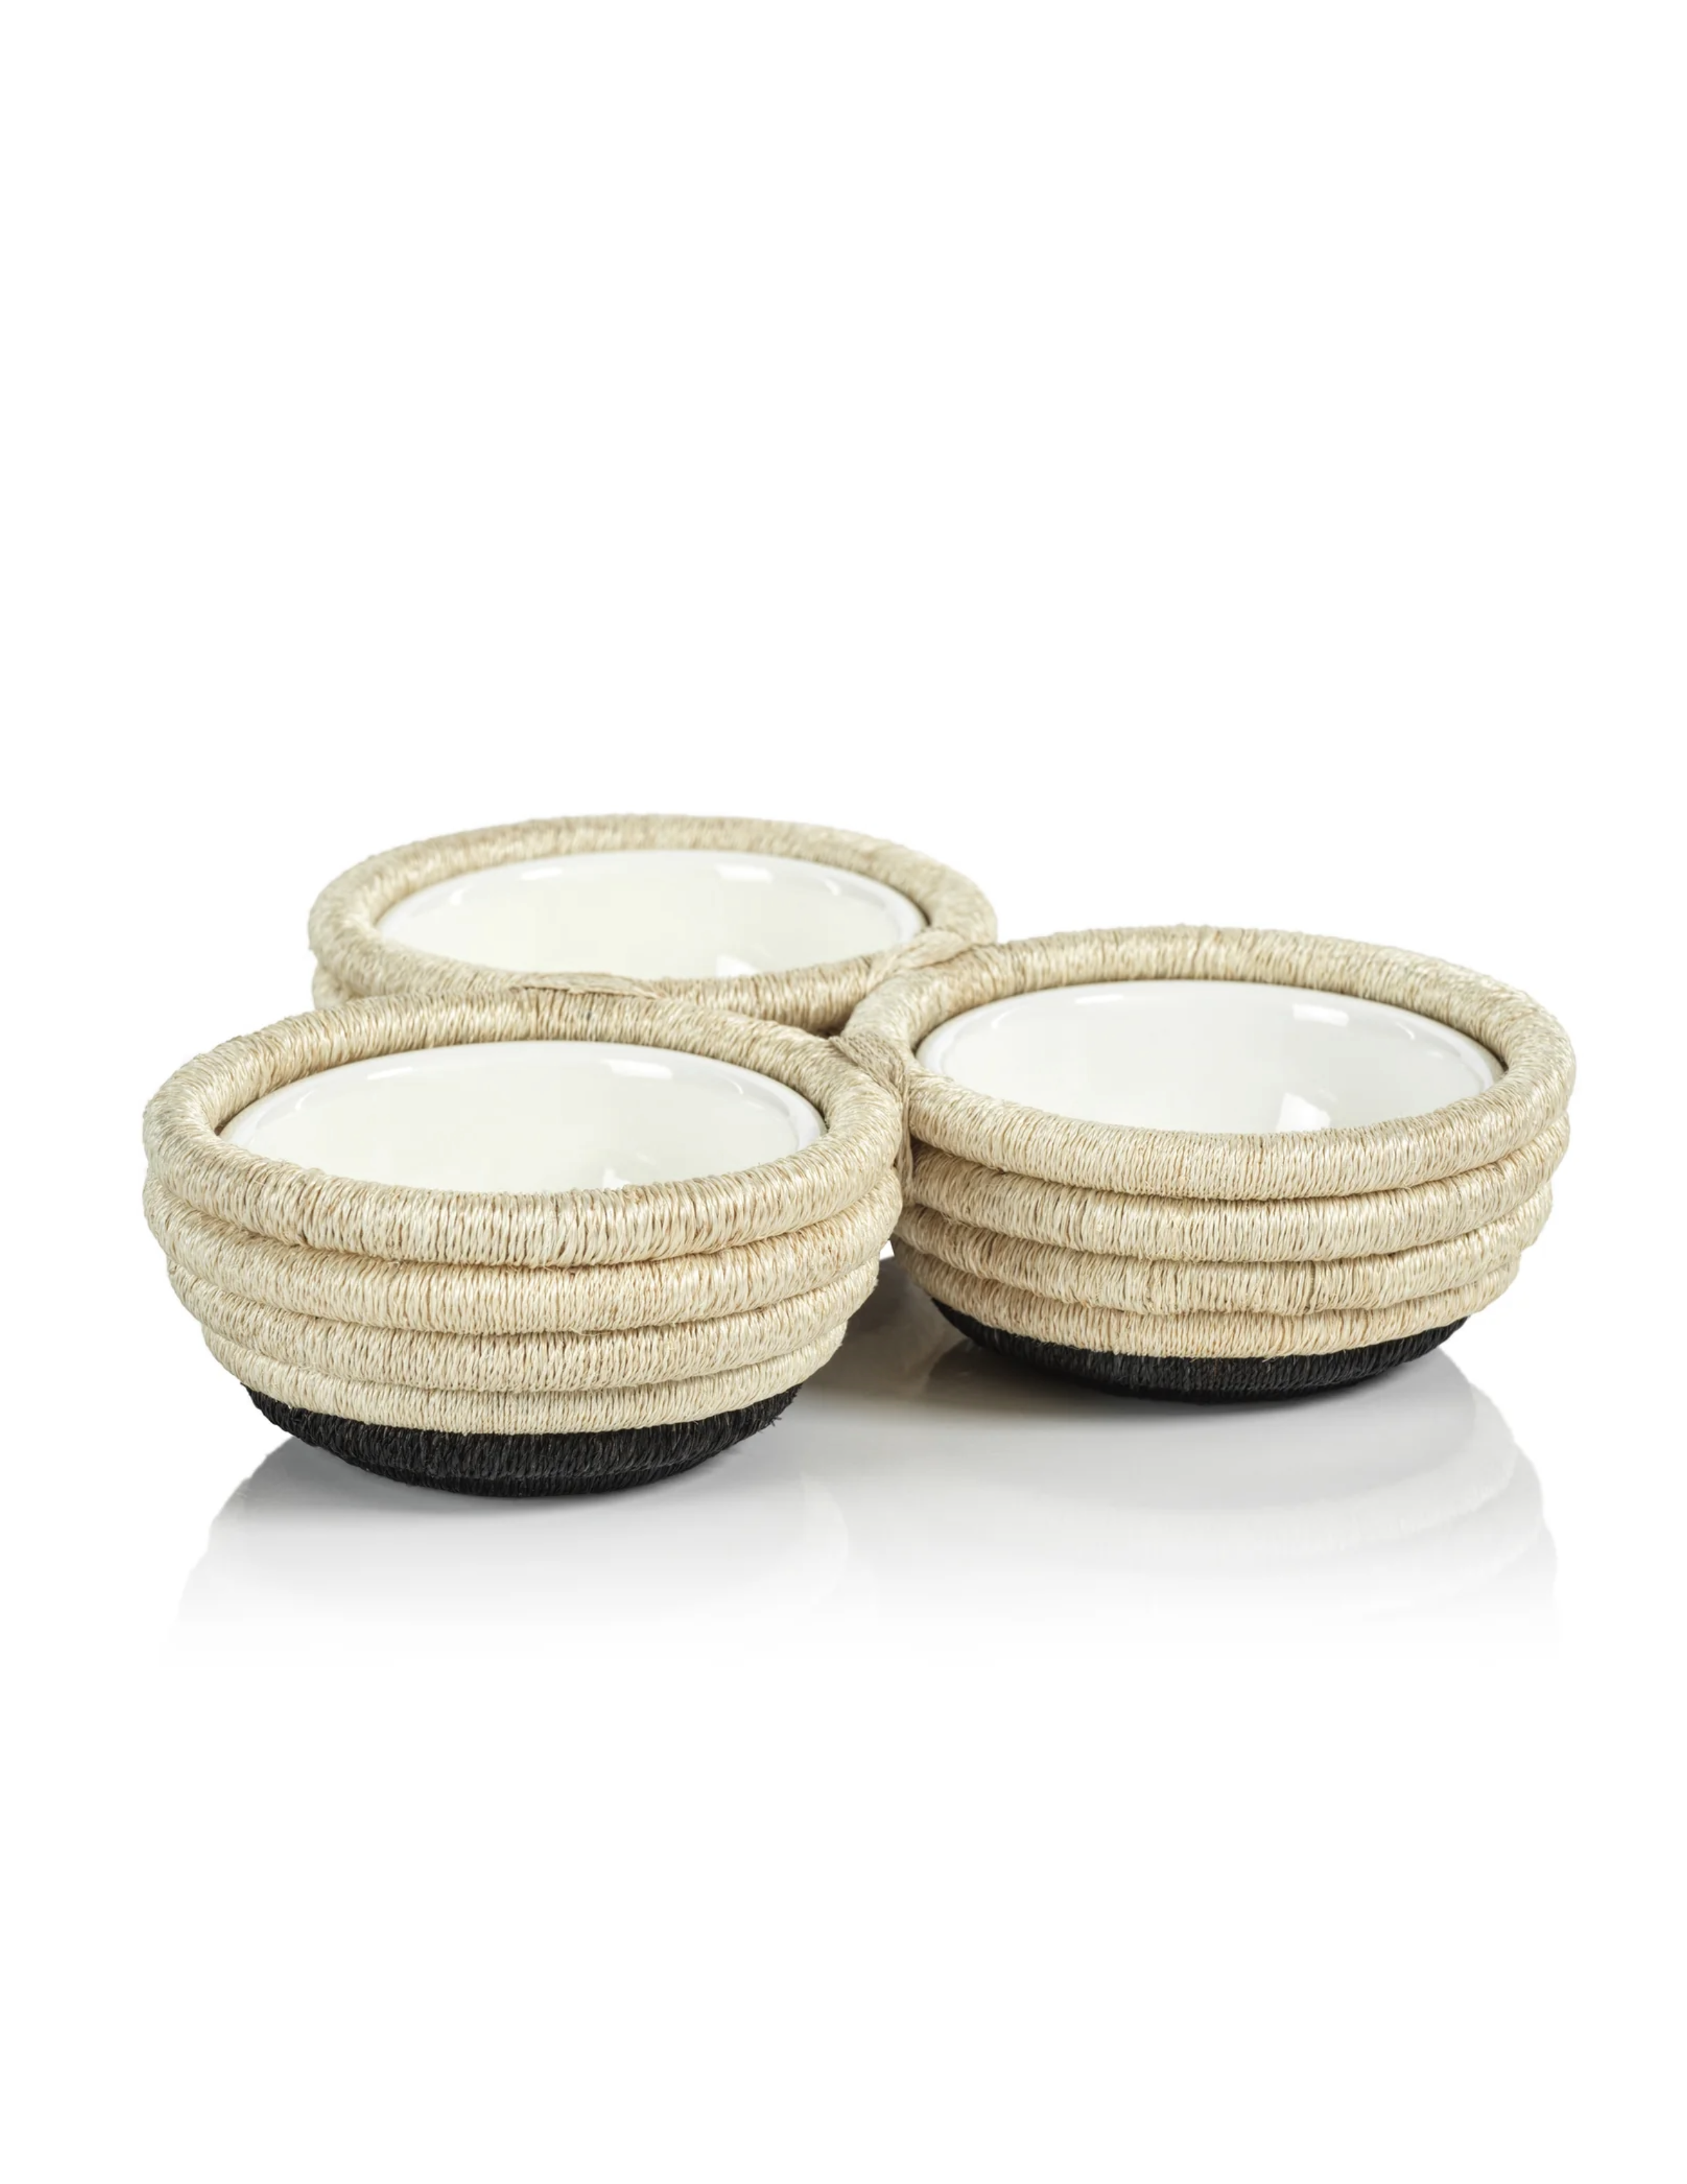 Martigues Coiled Abaca 3 Section Condiment Bowl